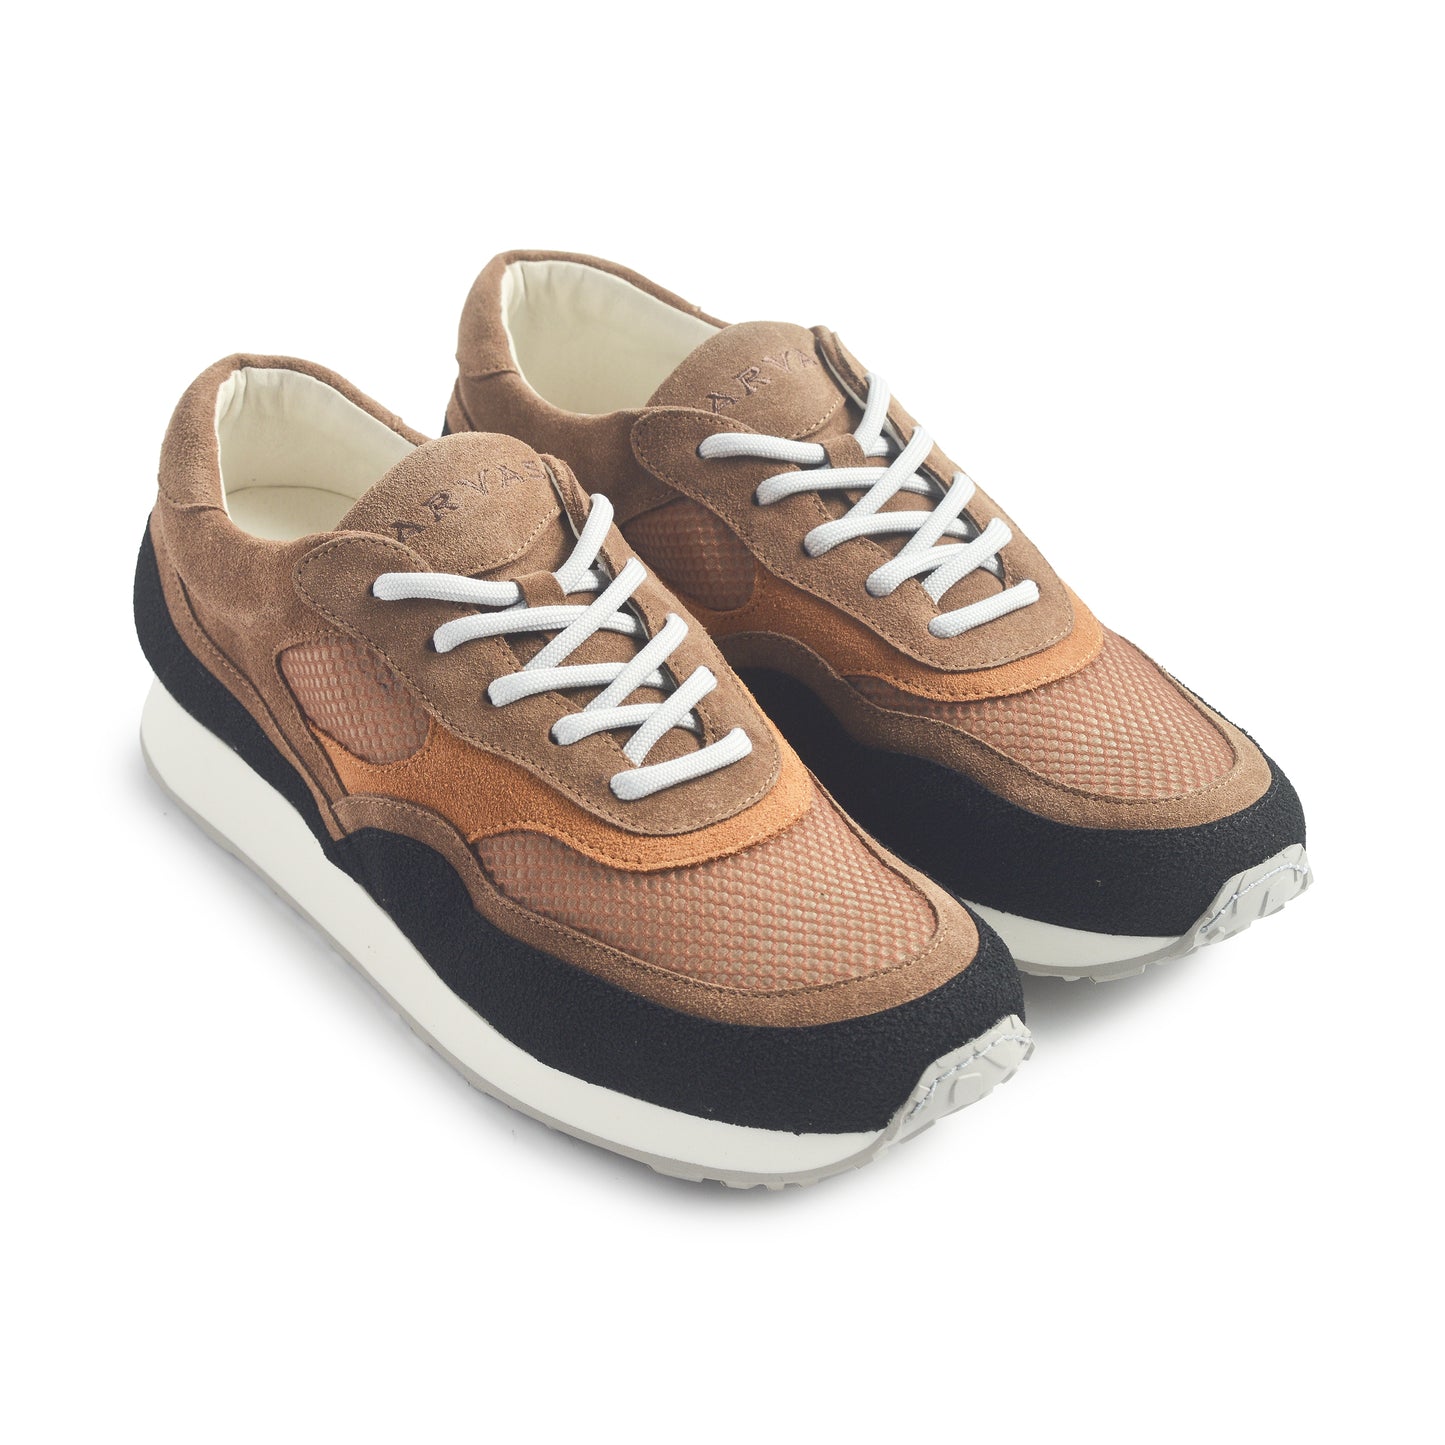 Tarvas Forest Bather Sneakers